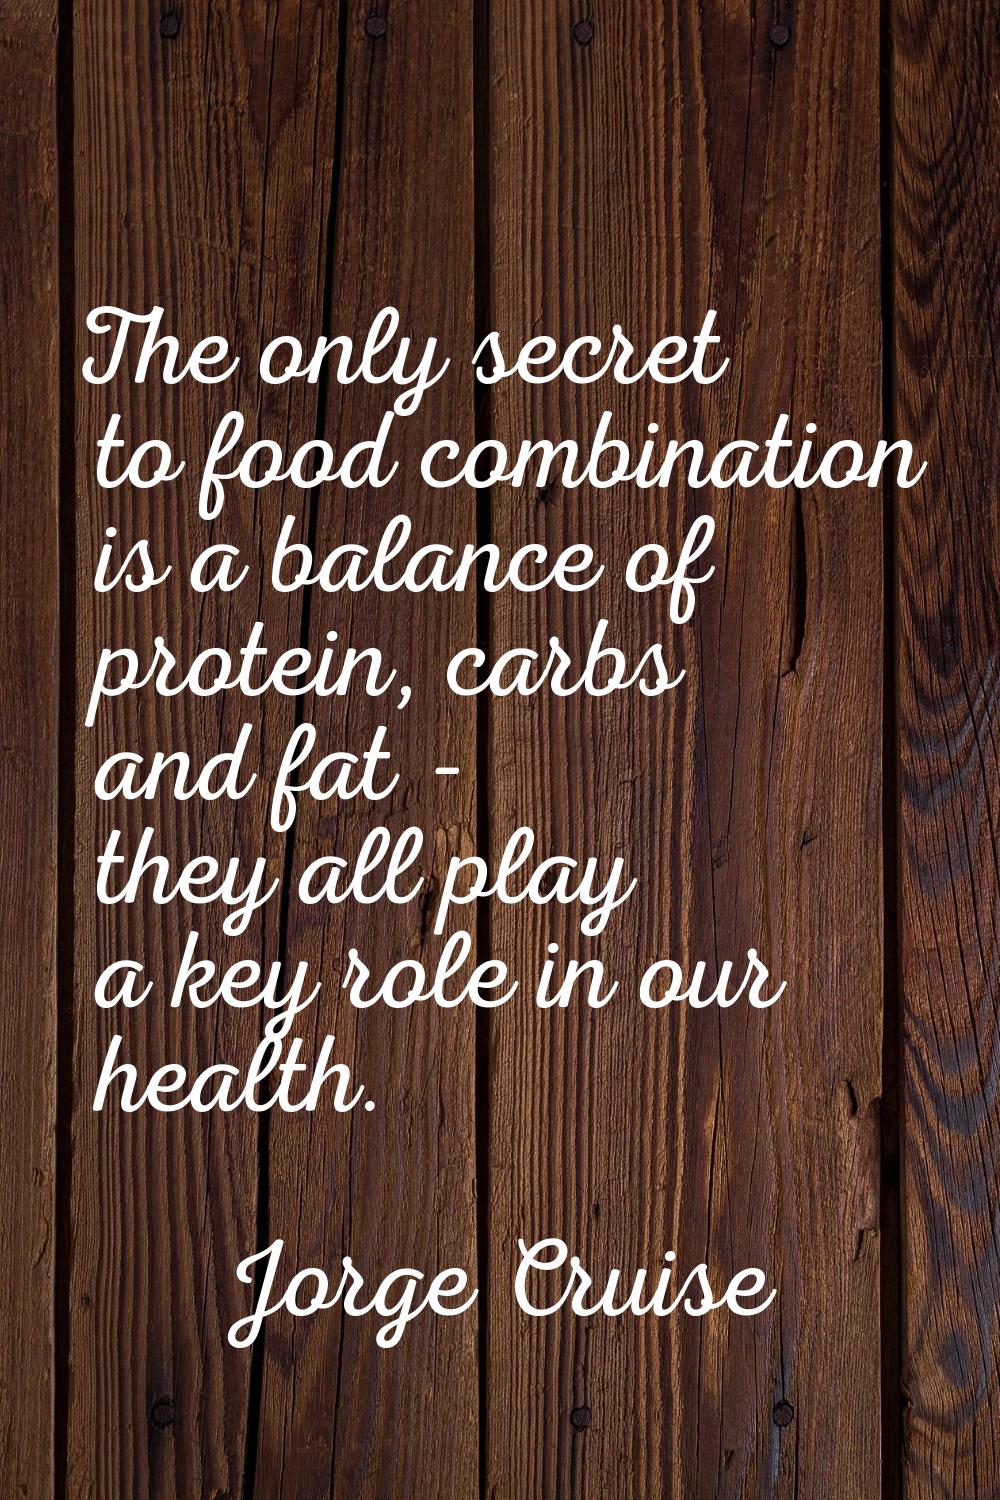 The only secret to food combination is a balance of protein, carbs and fat - they all play a key ro